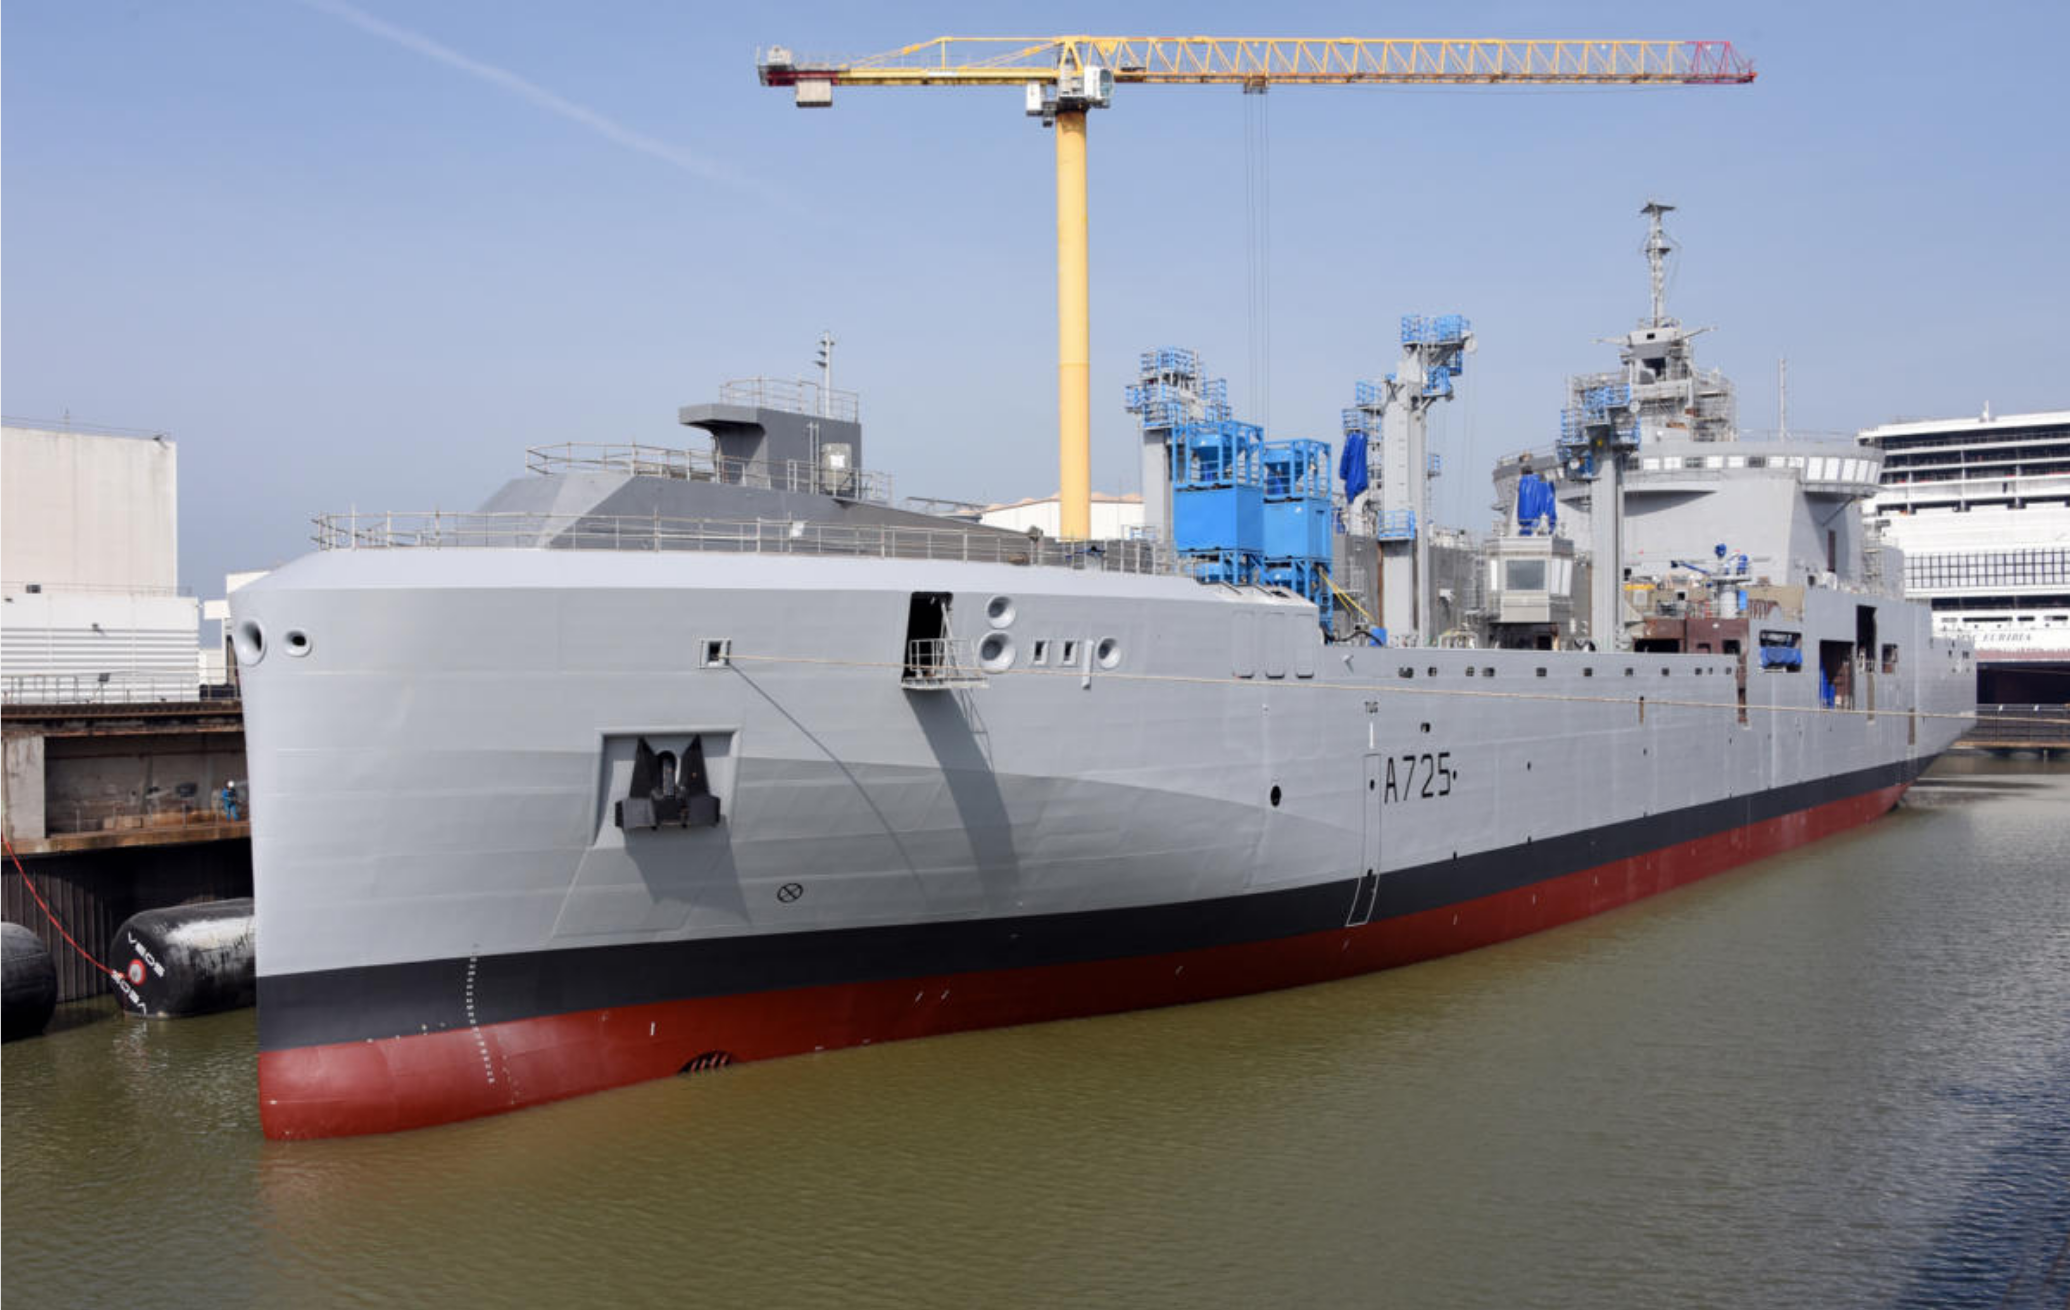 Launching of the Jacques Chevallier, the first of four new logistic support ships for the French Navy